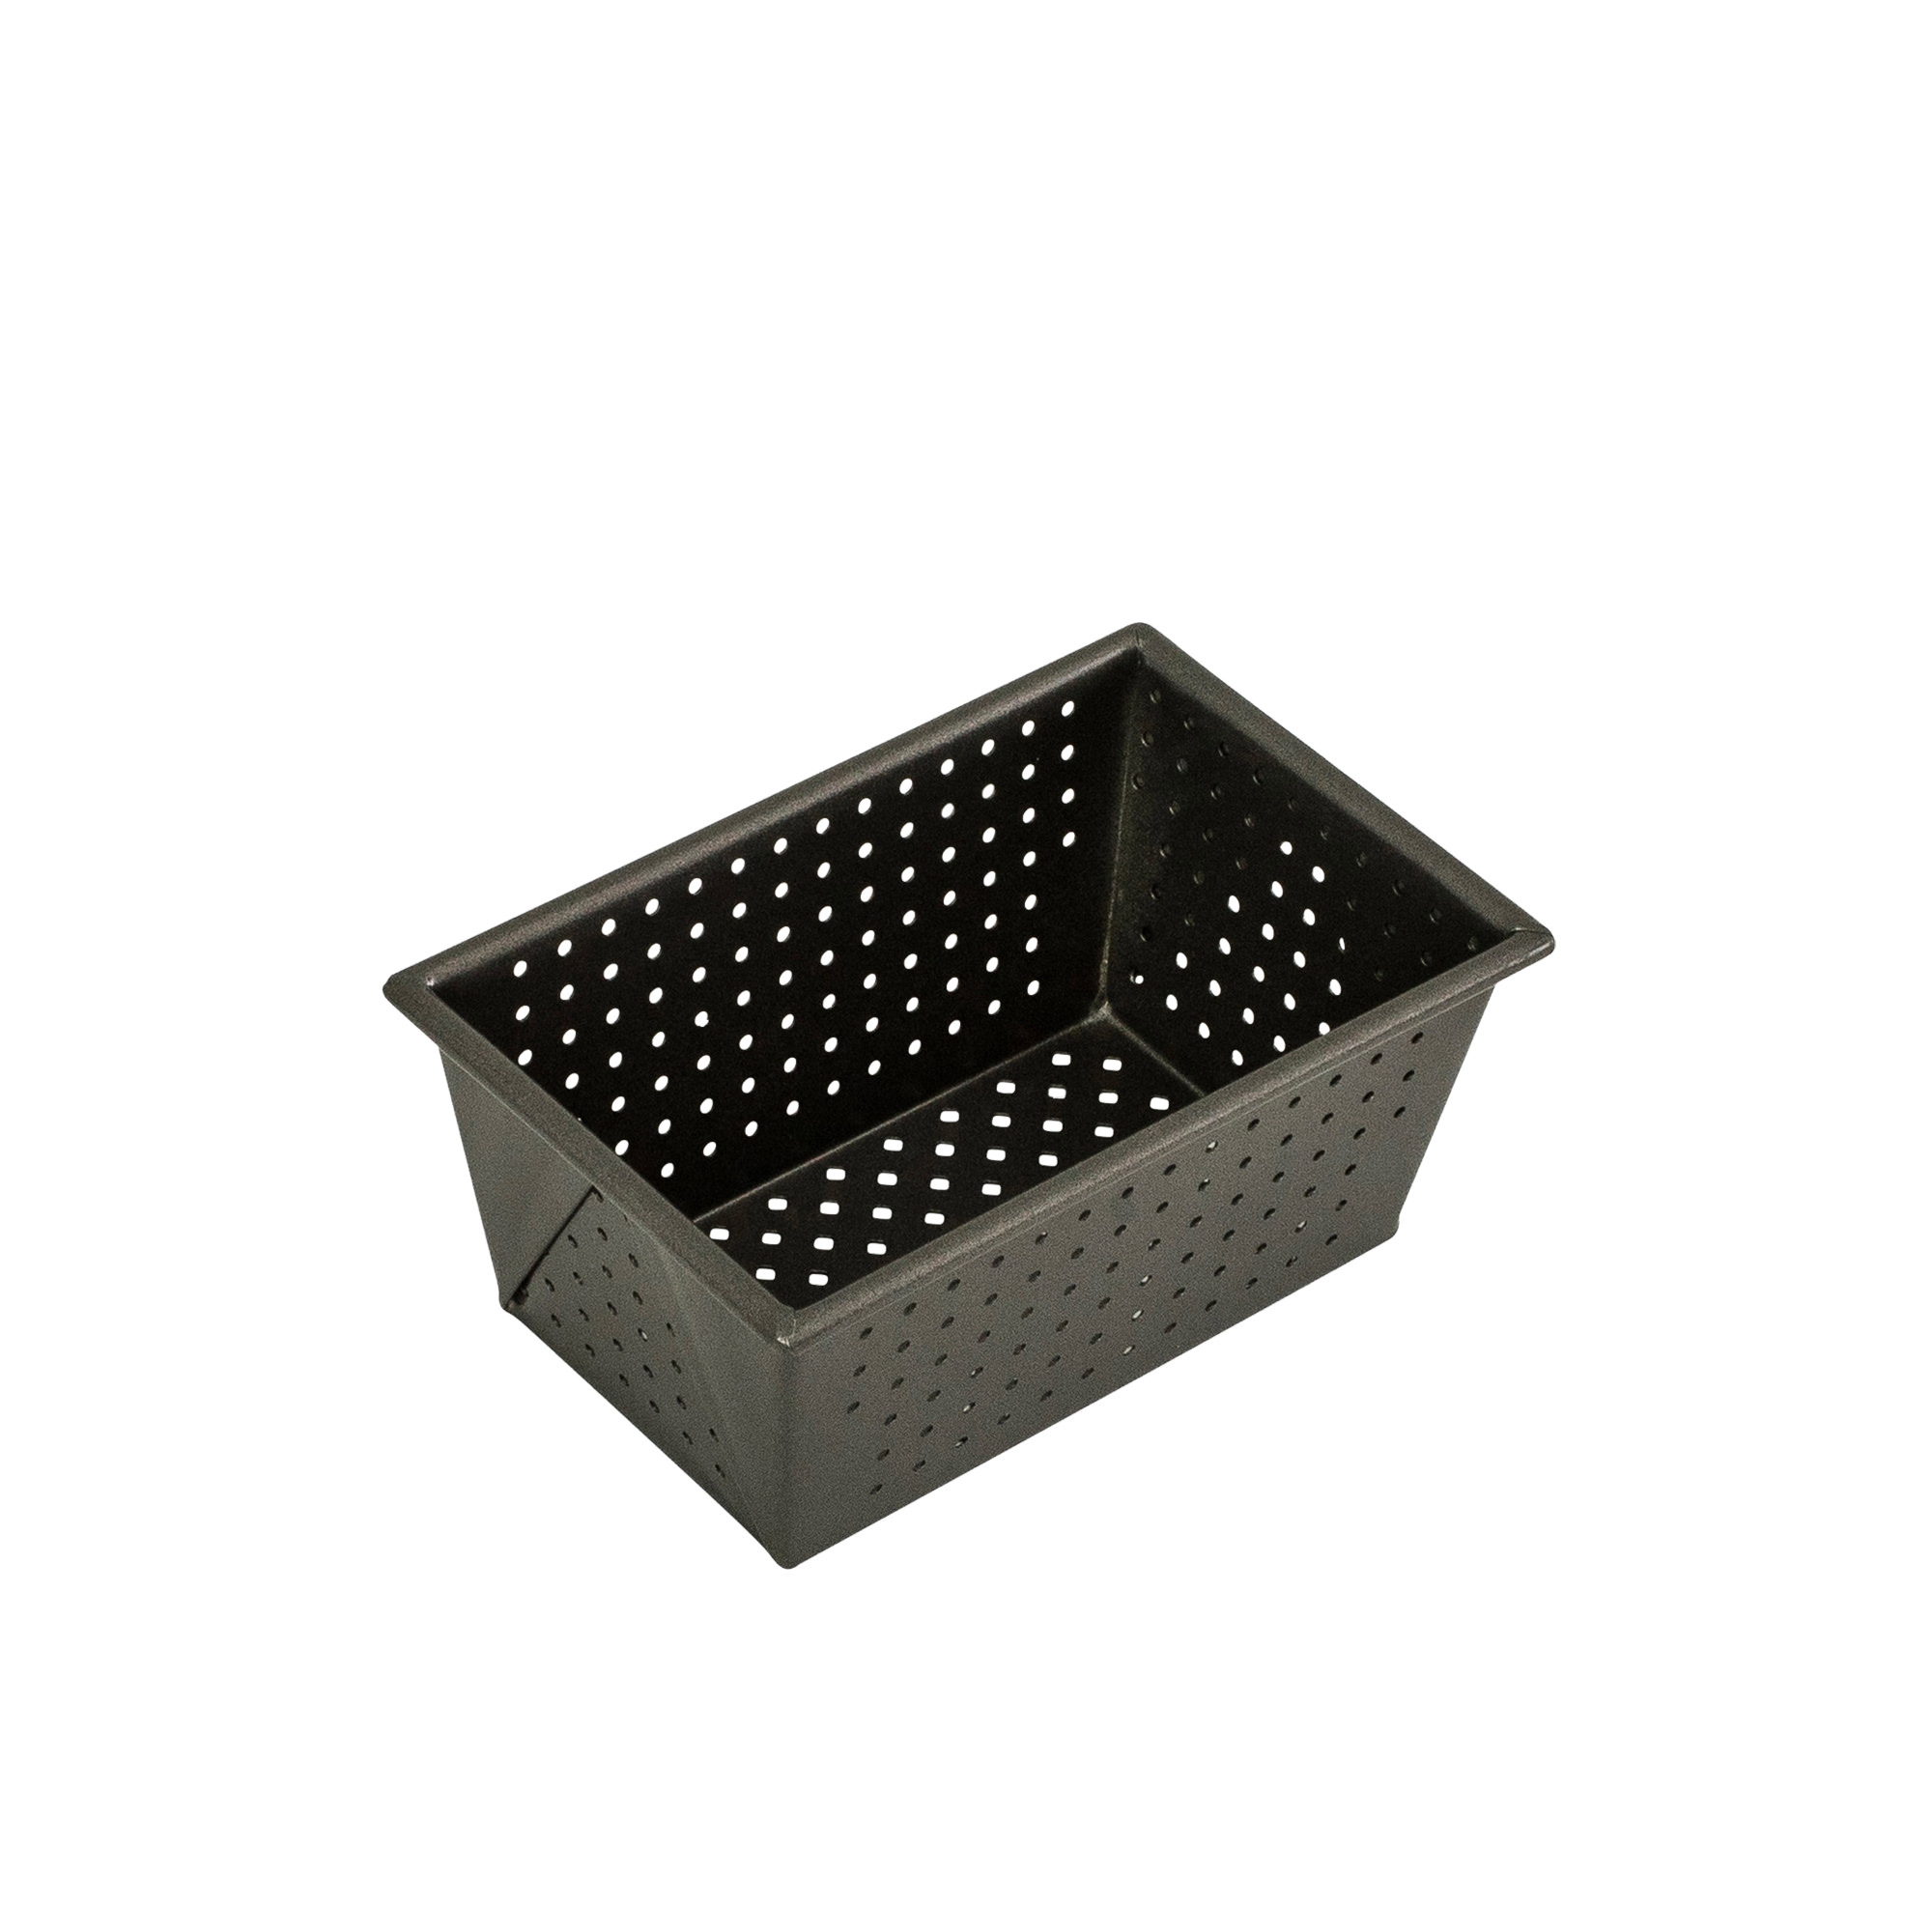 Bakemaster Non Stick Perfect Crust Box Sided Loaf Pan 15x10cm Image 1